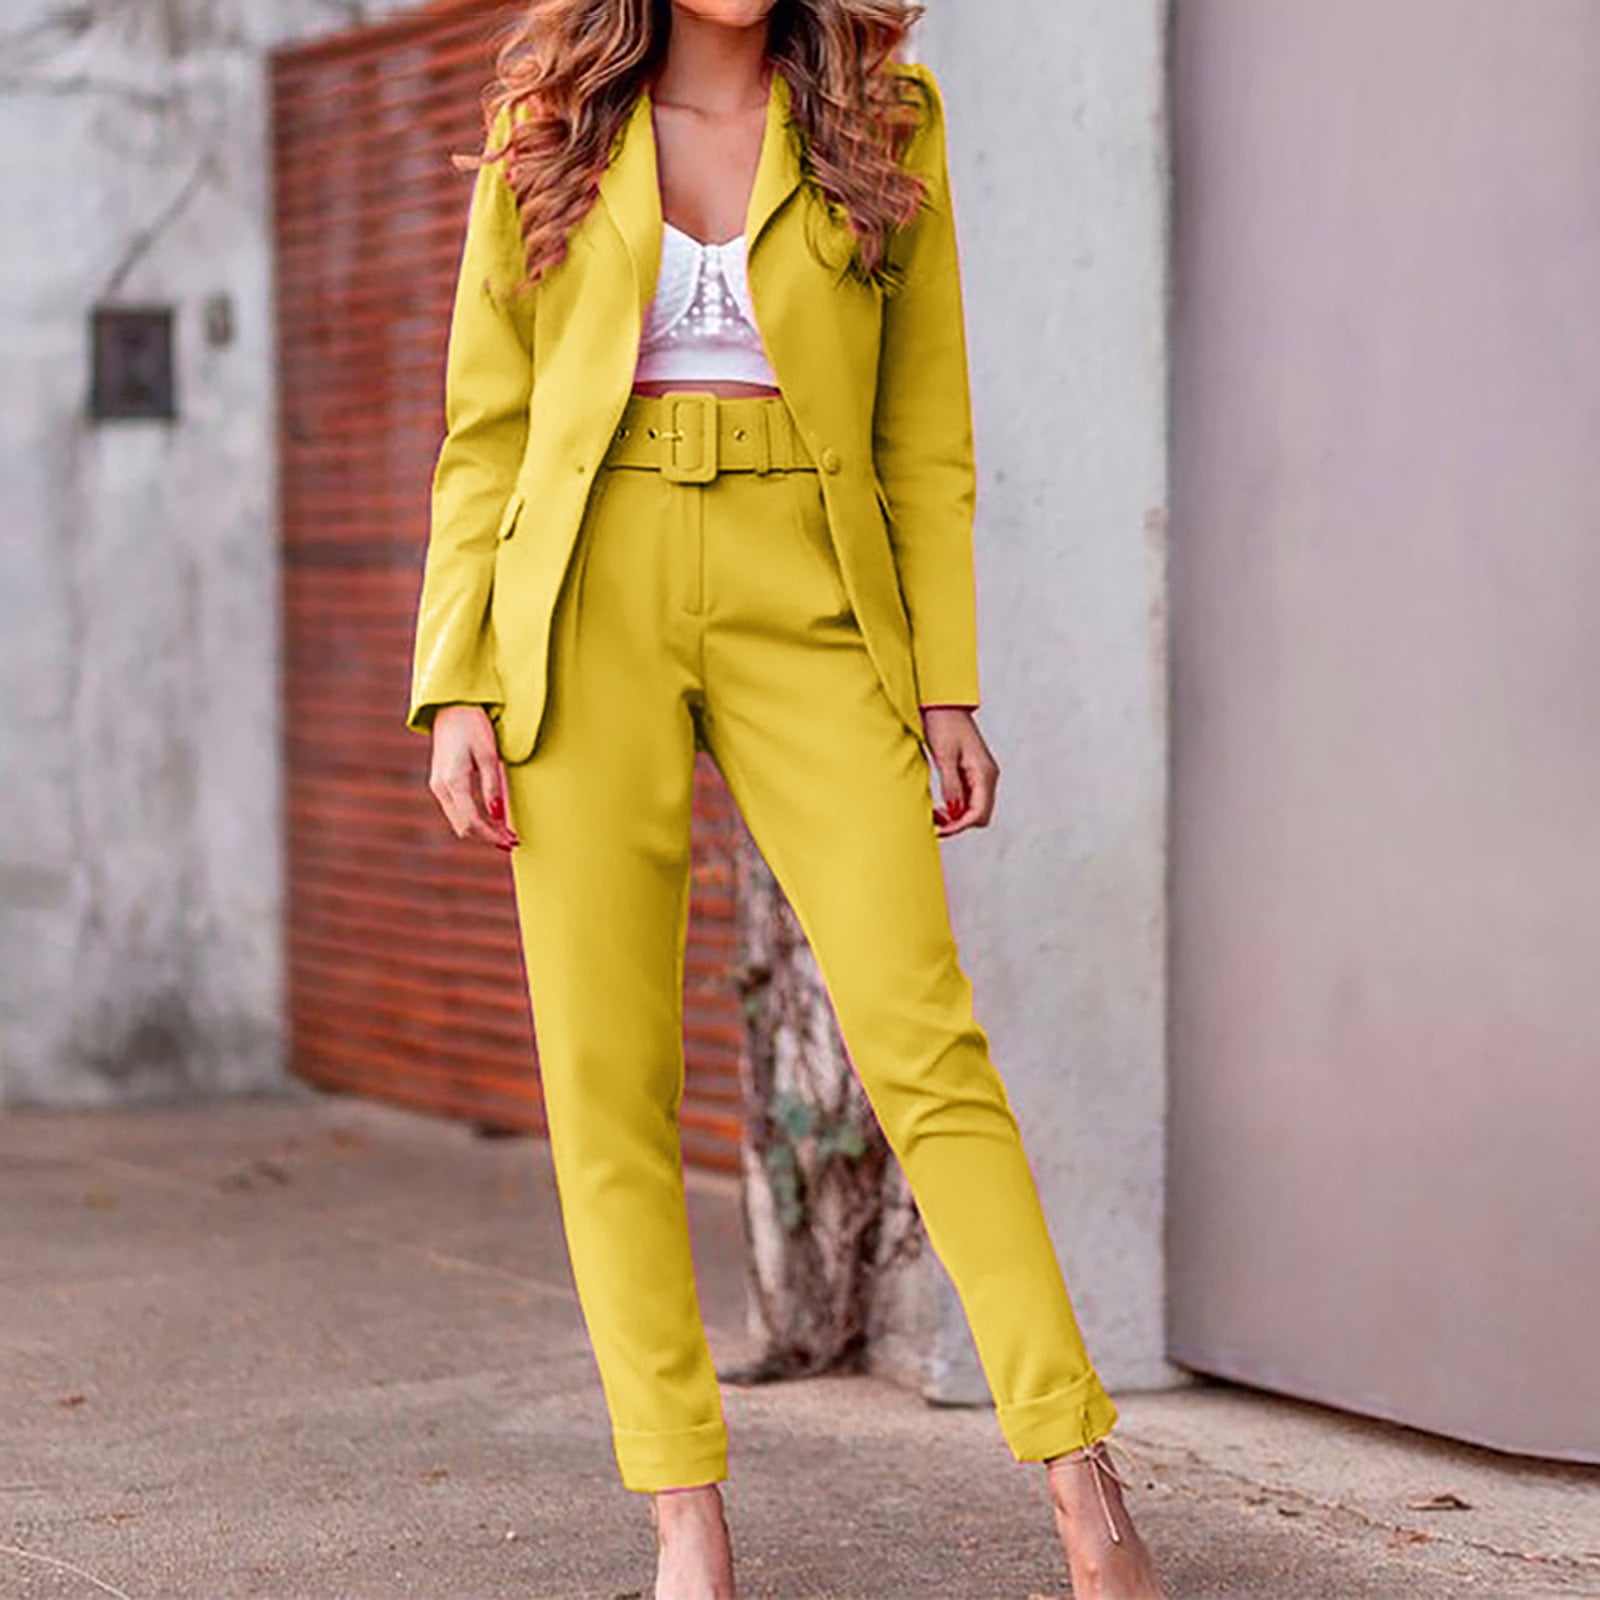 Discover 161+ mustard yellow suit best